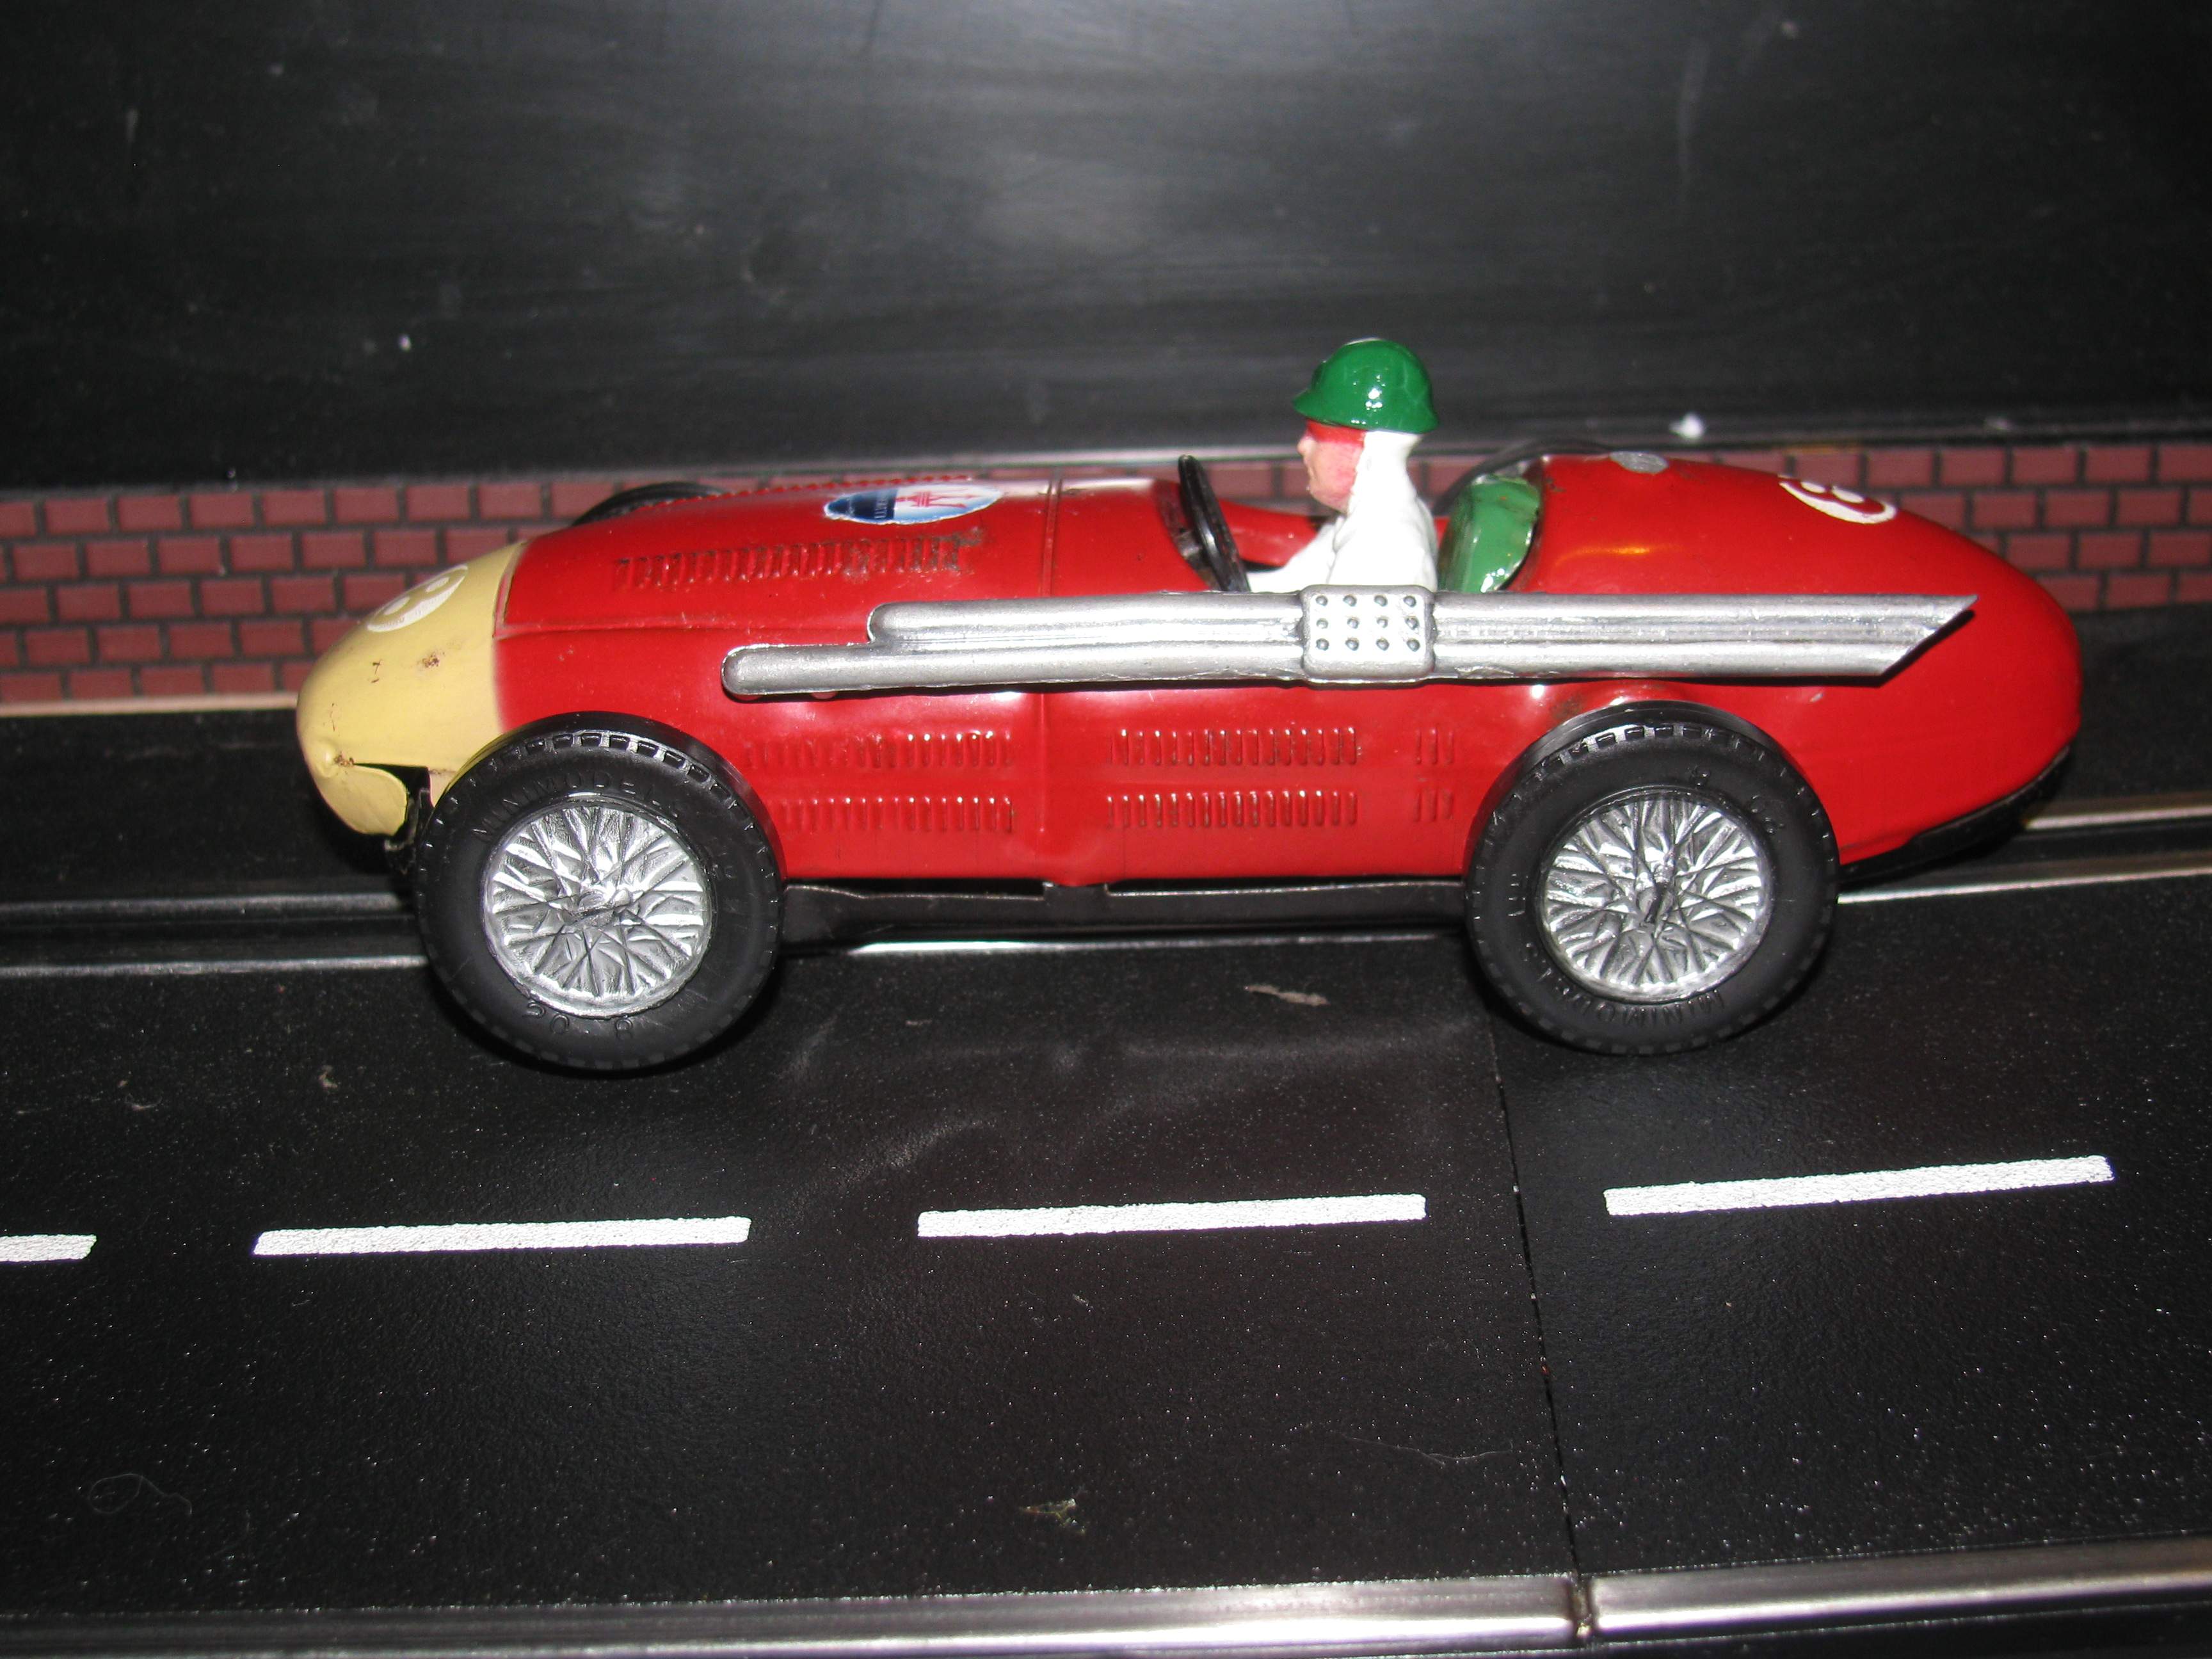 * SOLD * Vintage 1957 Scalextric Tinplate Maserati 250F Slot Car 1/32 Scale